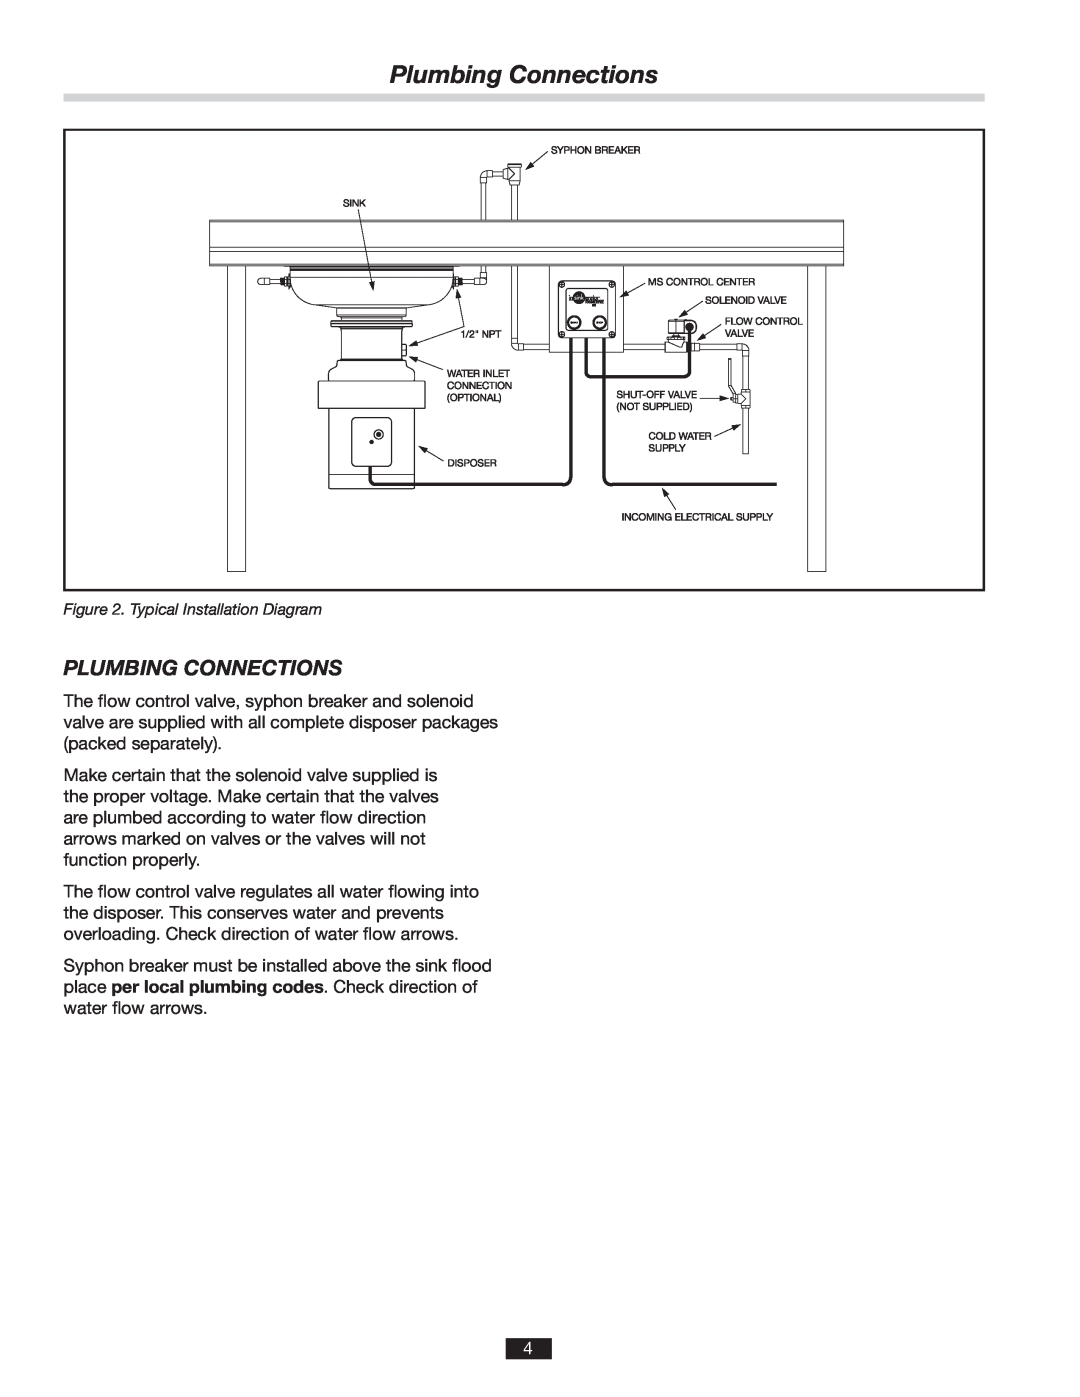 InSinkErator MS installation manual Plumbing Connections 